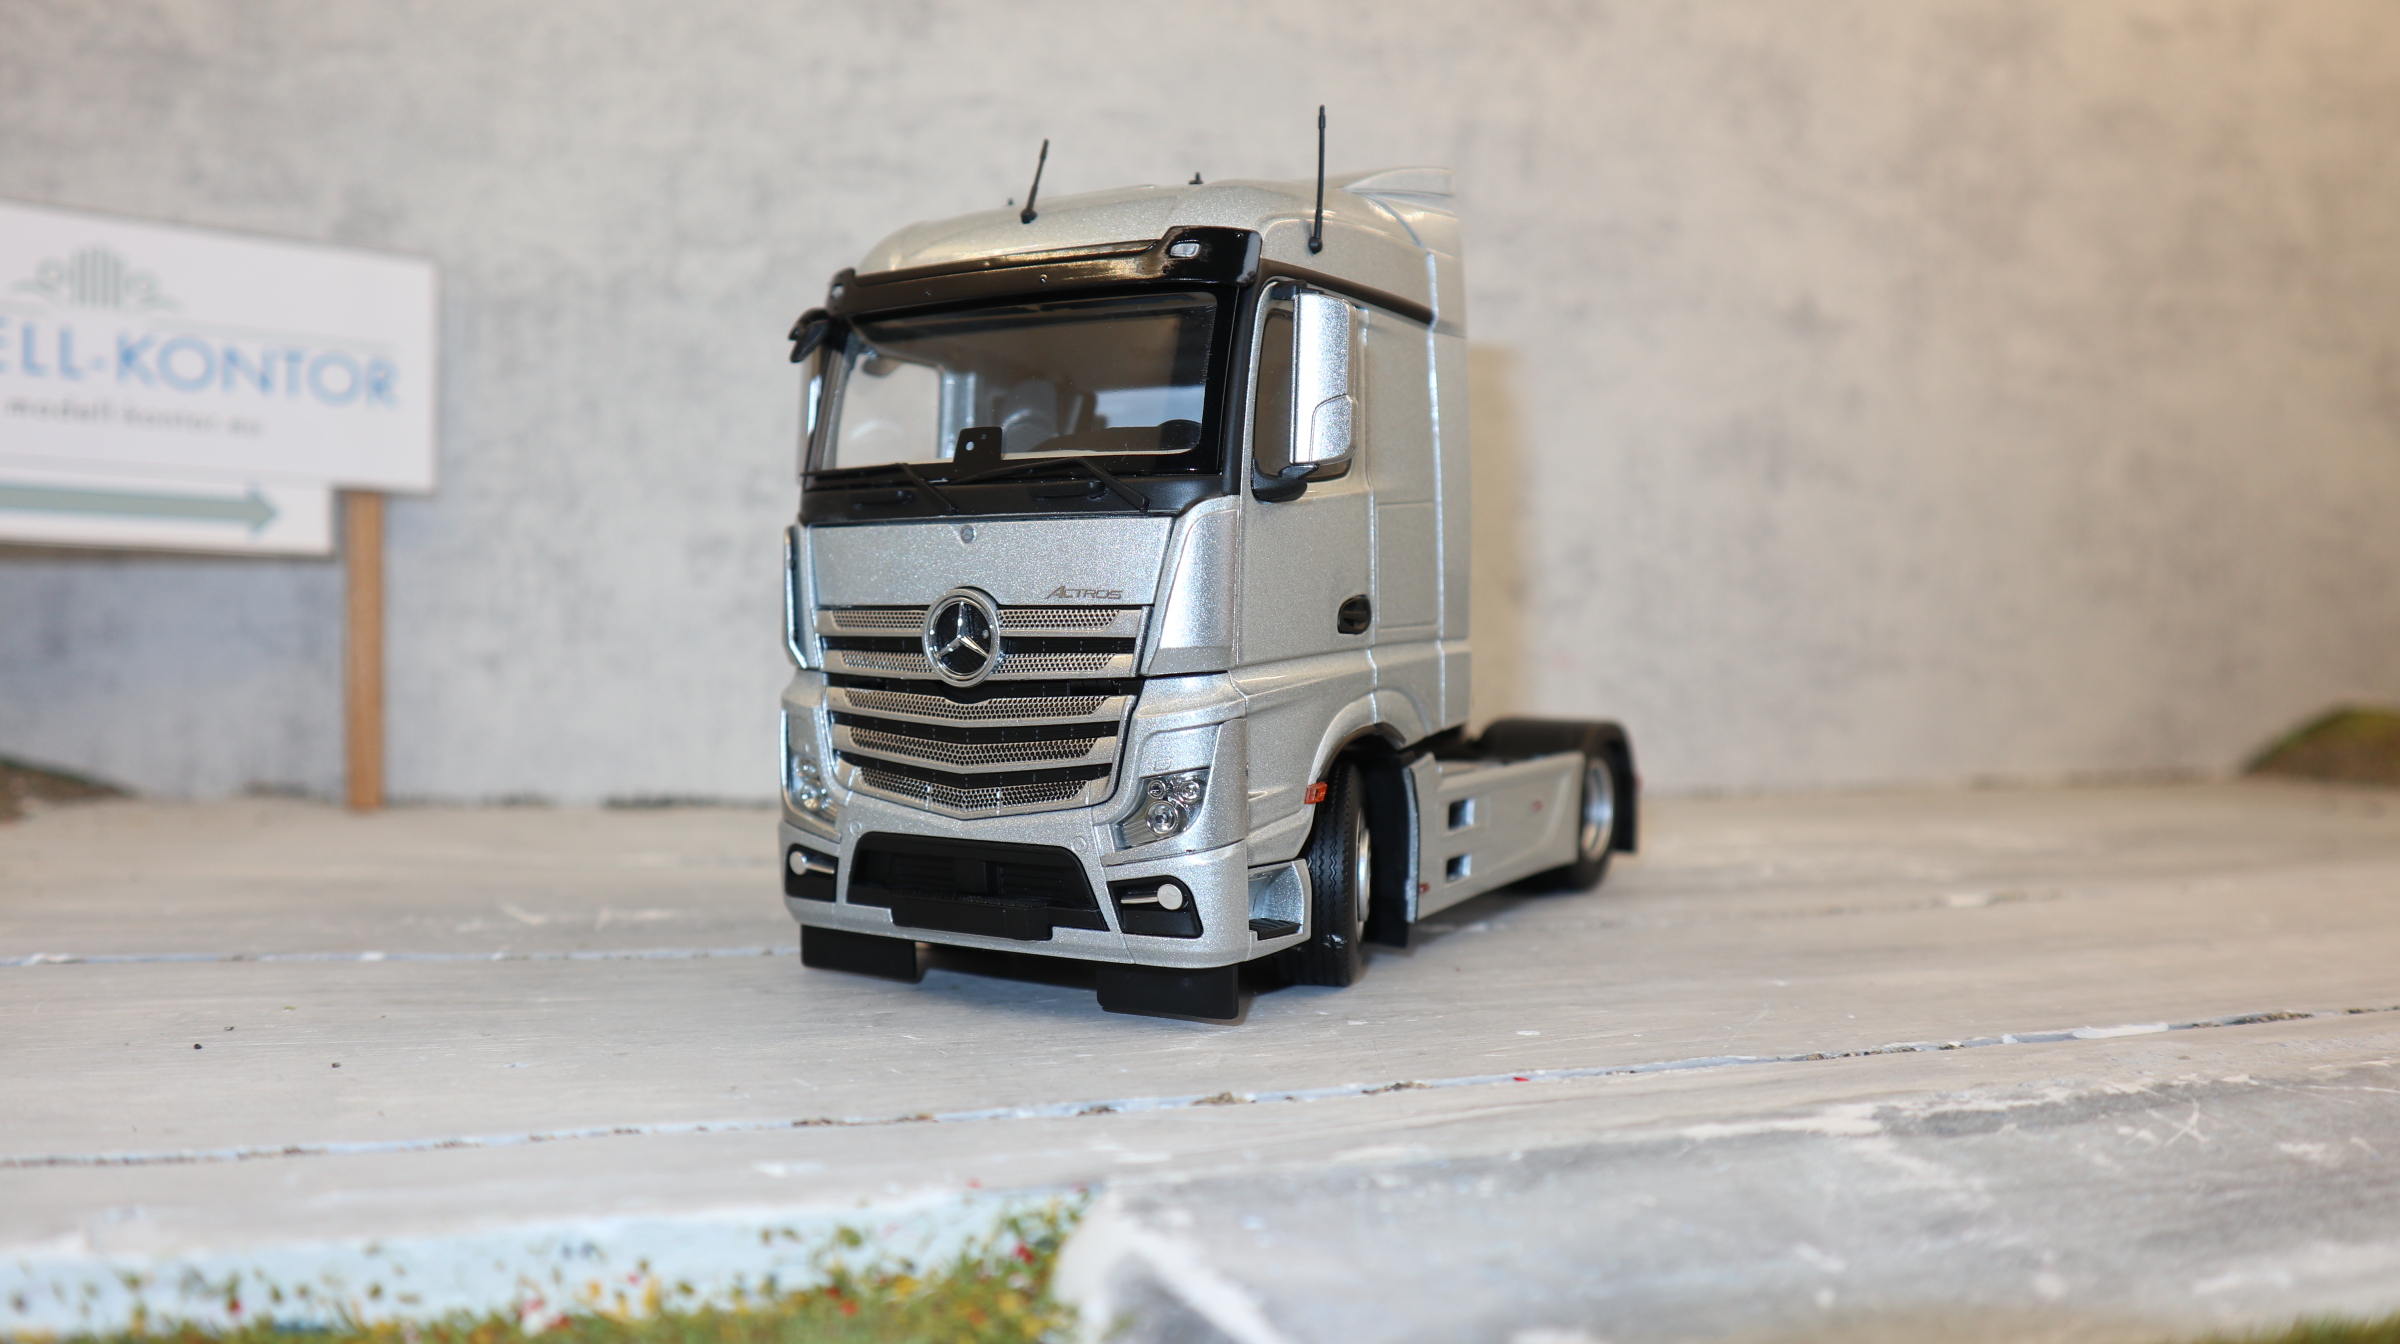 MarGe 1907-03 in 1:32,Mercedes-Benz Actros Streamspace 4x2 in silber als SZM, NEU in OVP